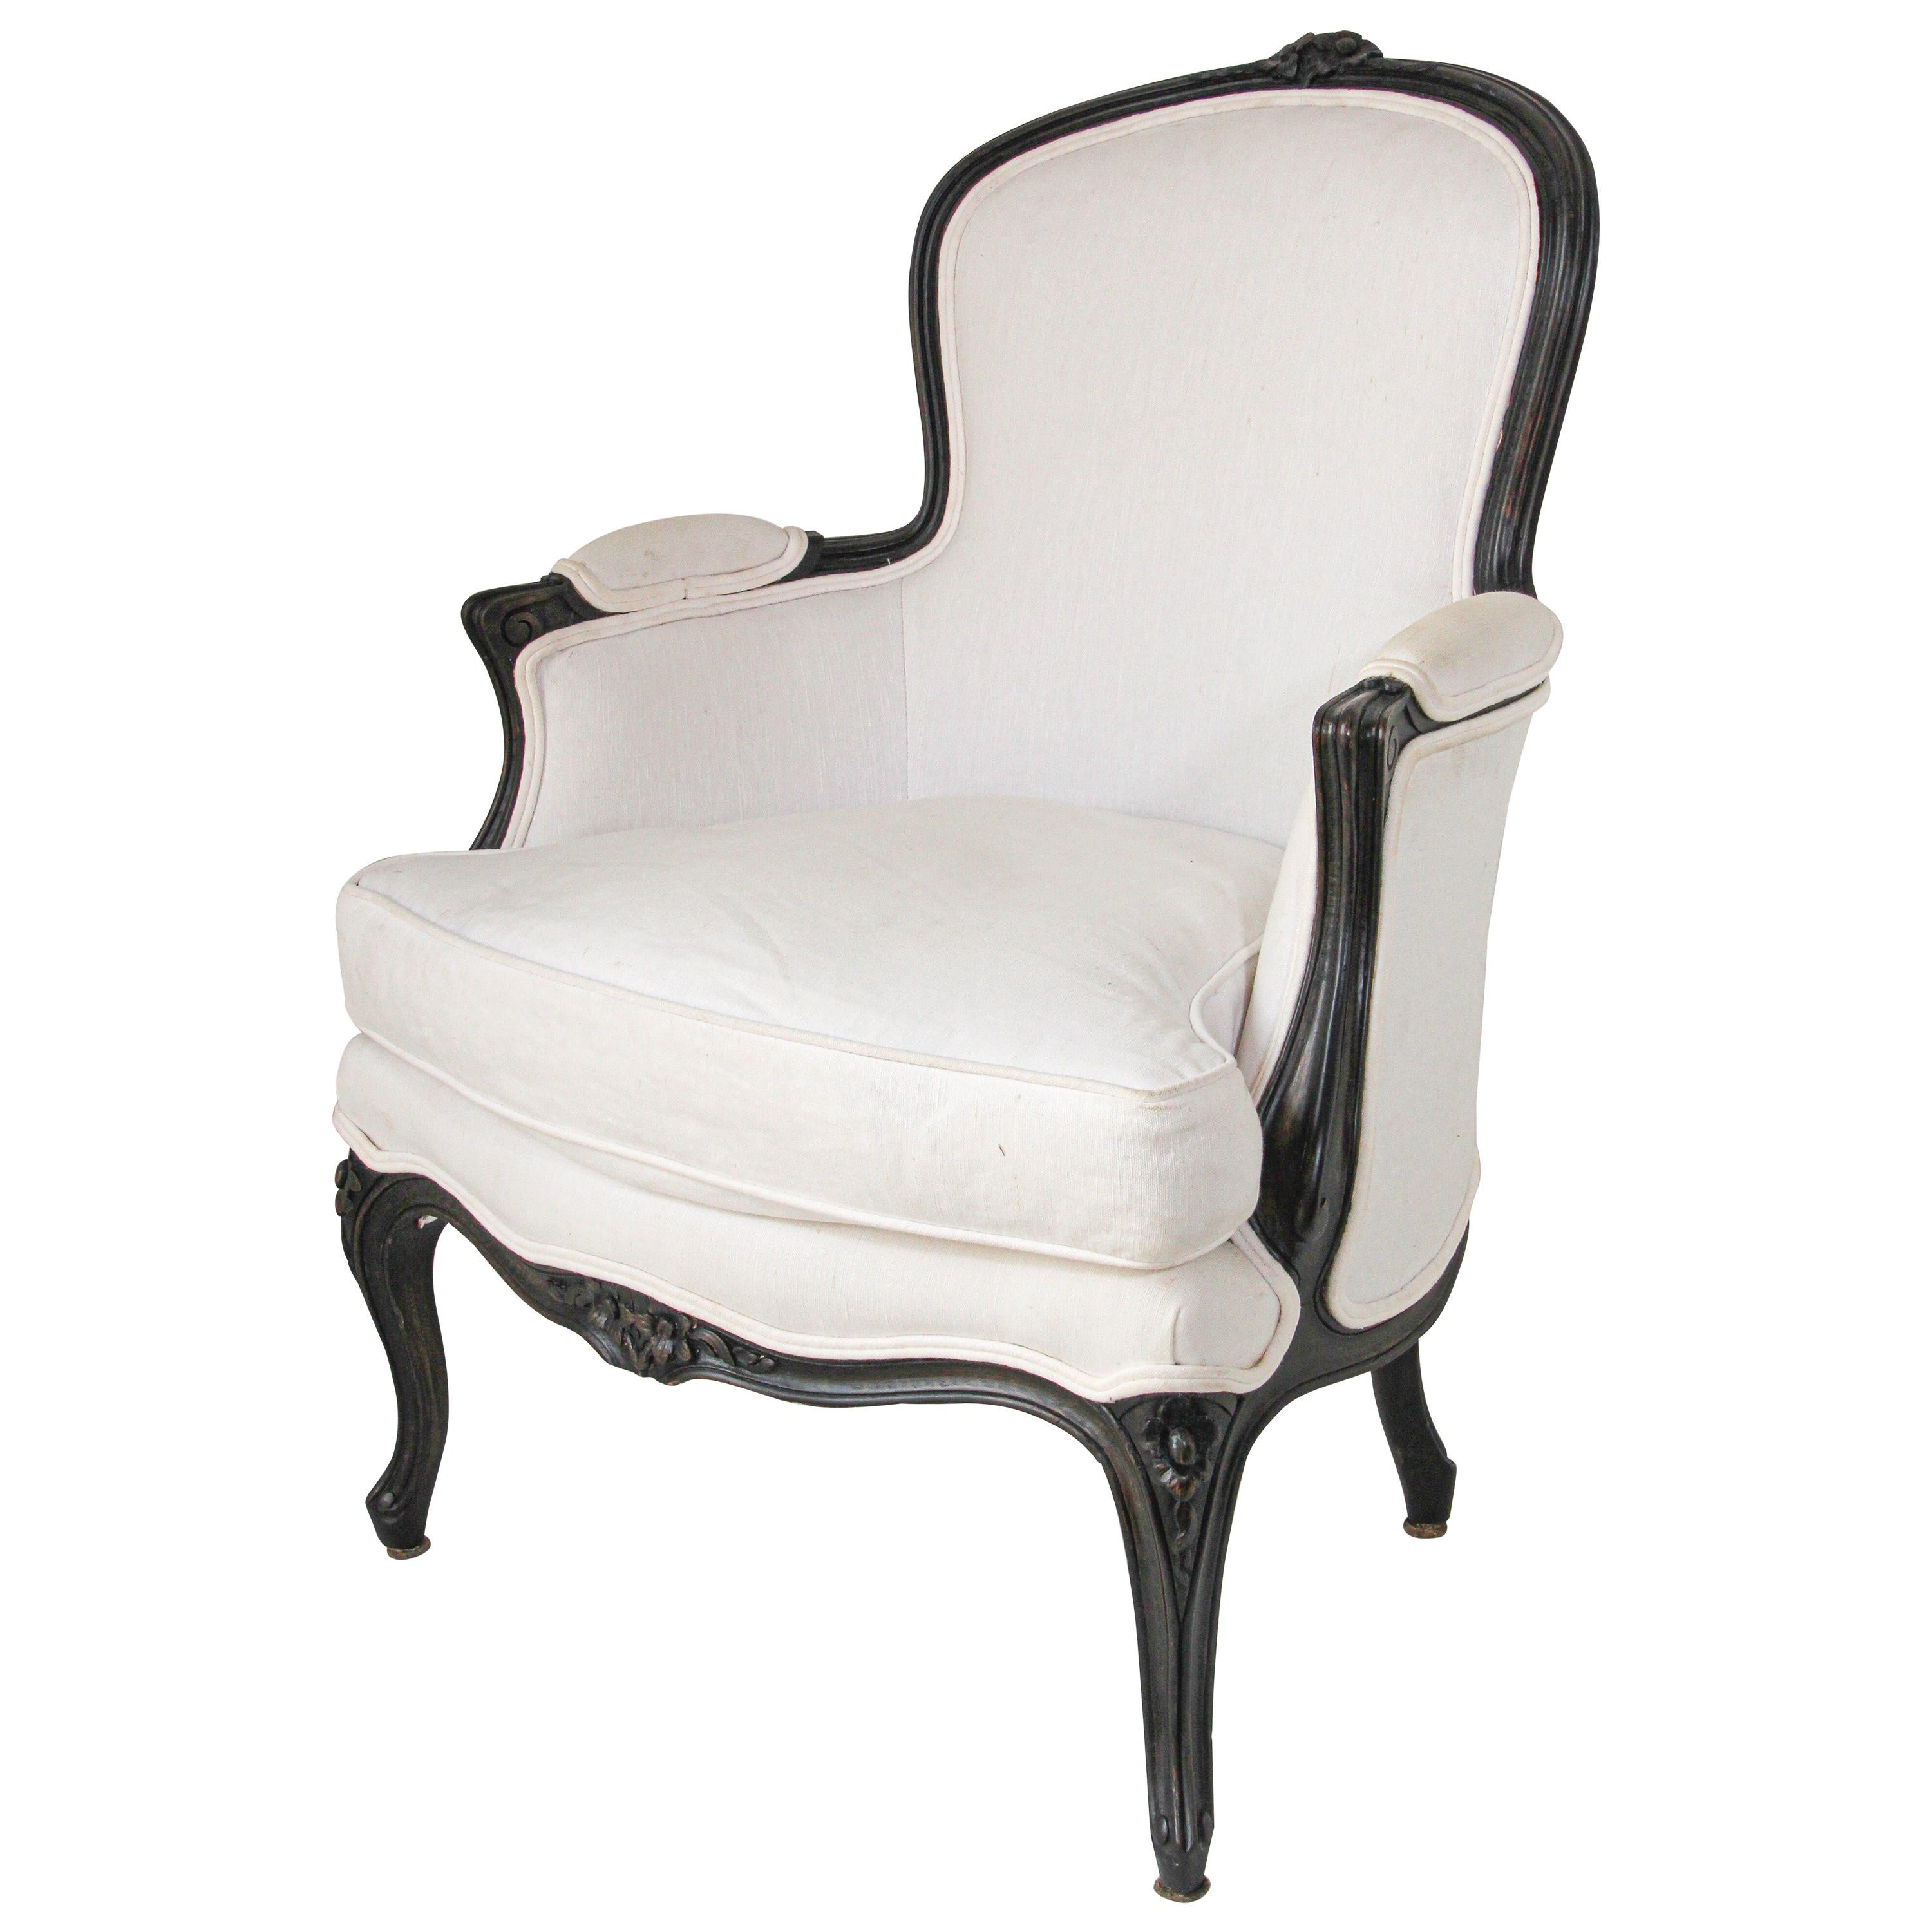 Louis XV French Provincial Style Open Armchair